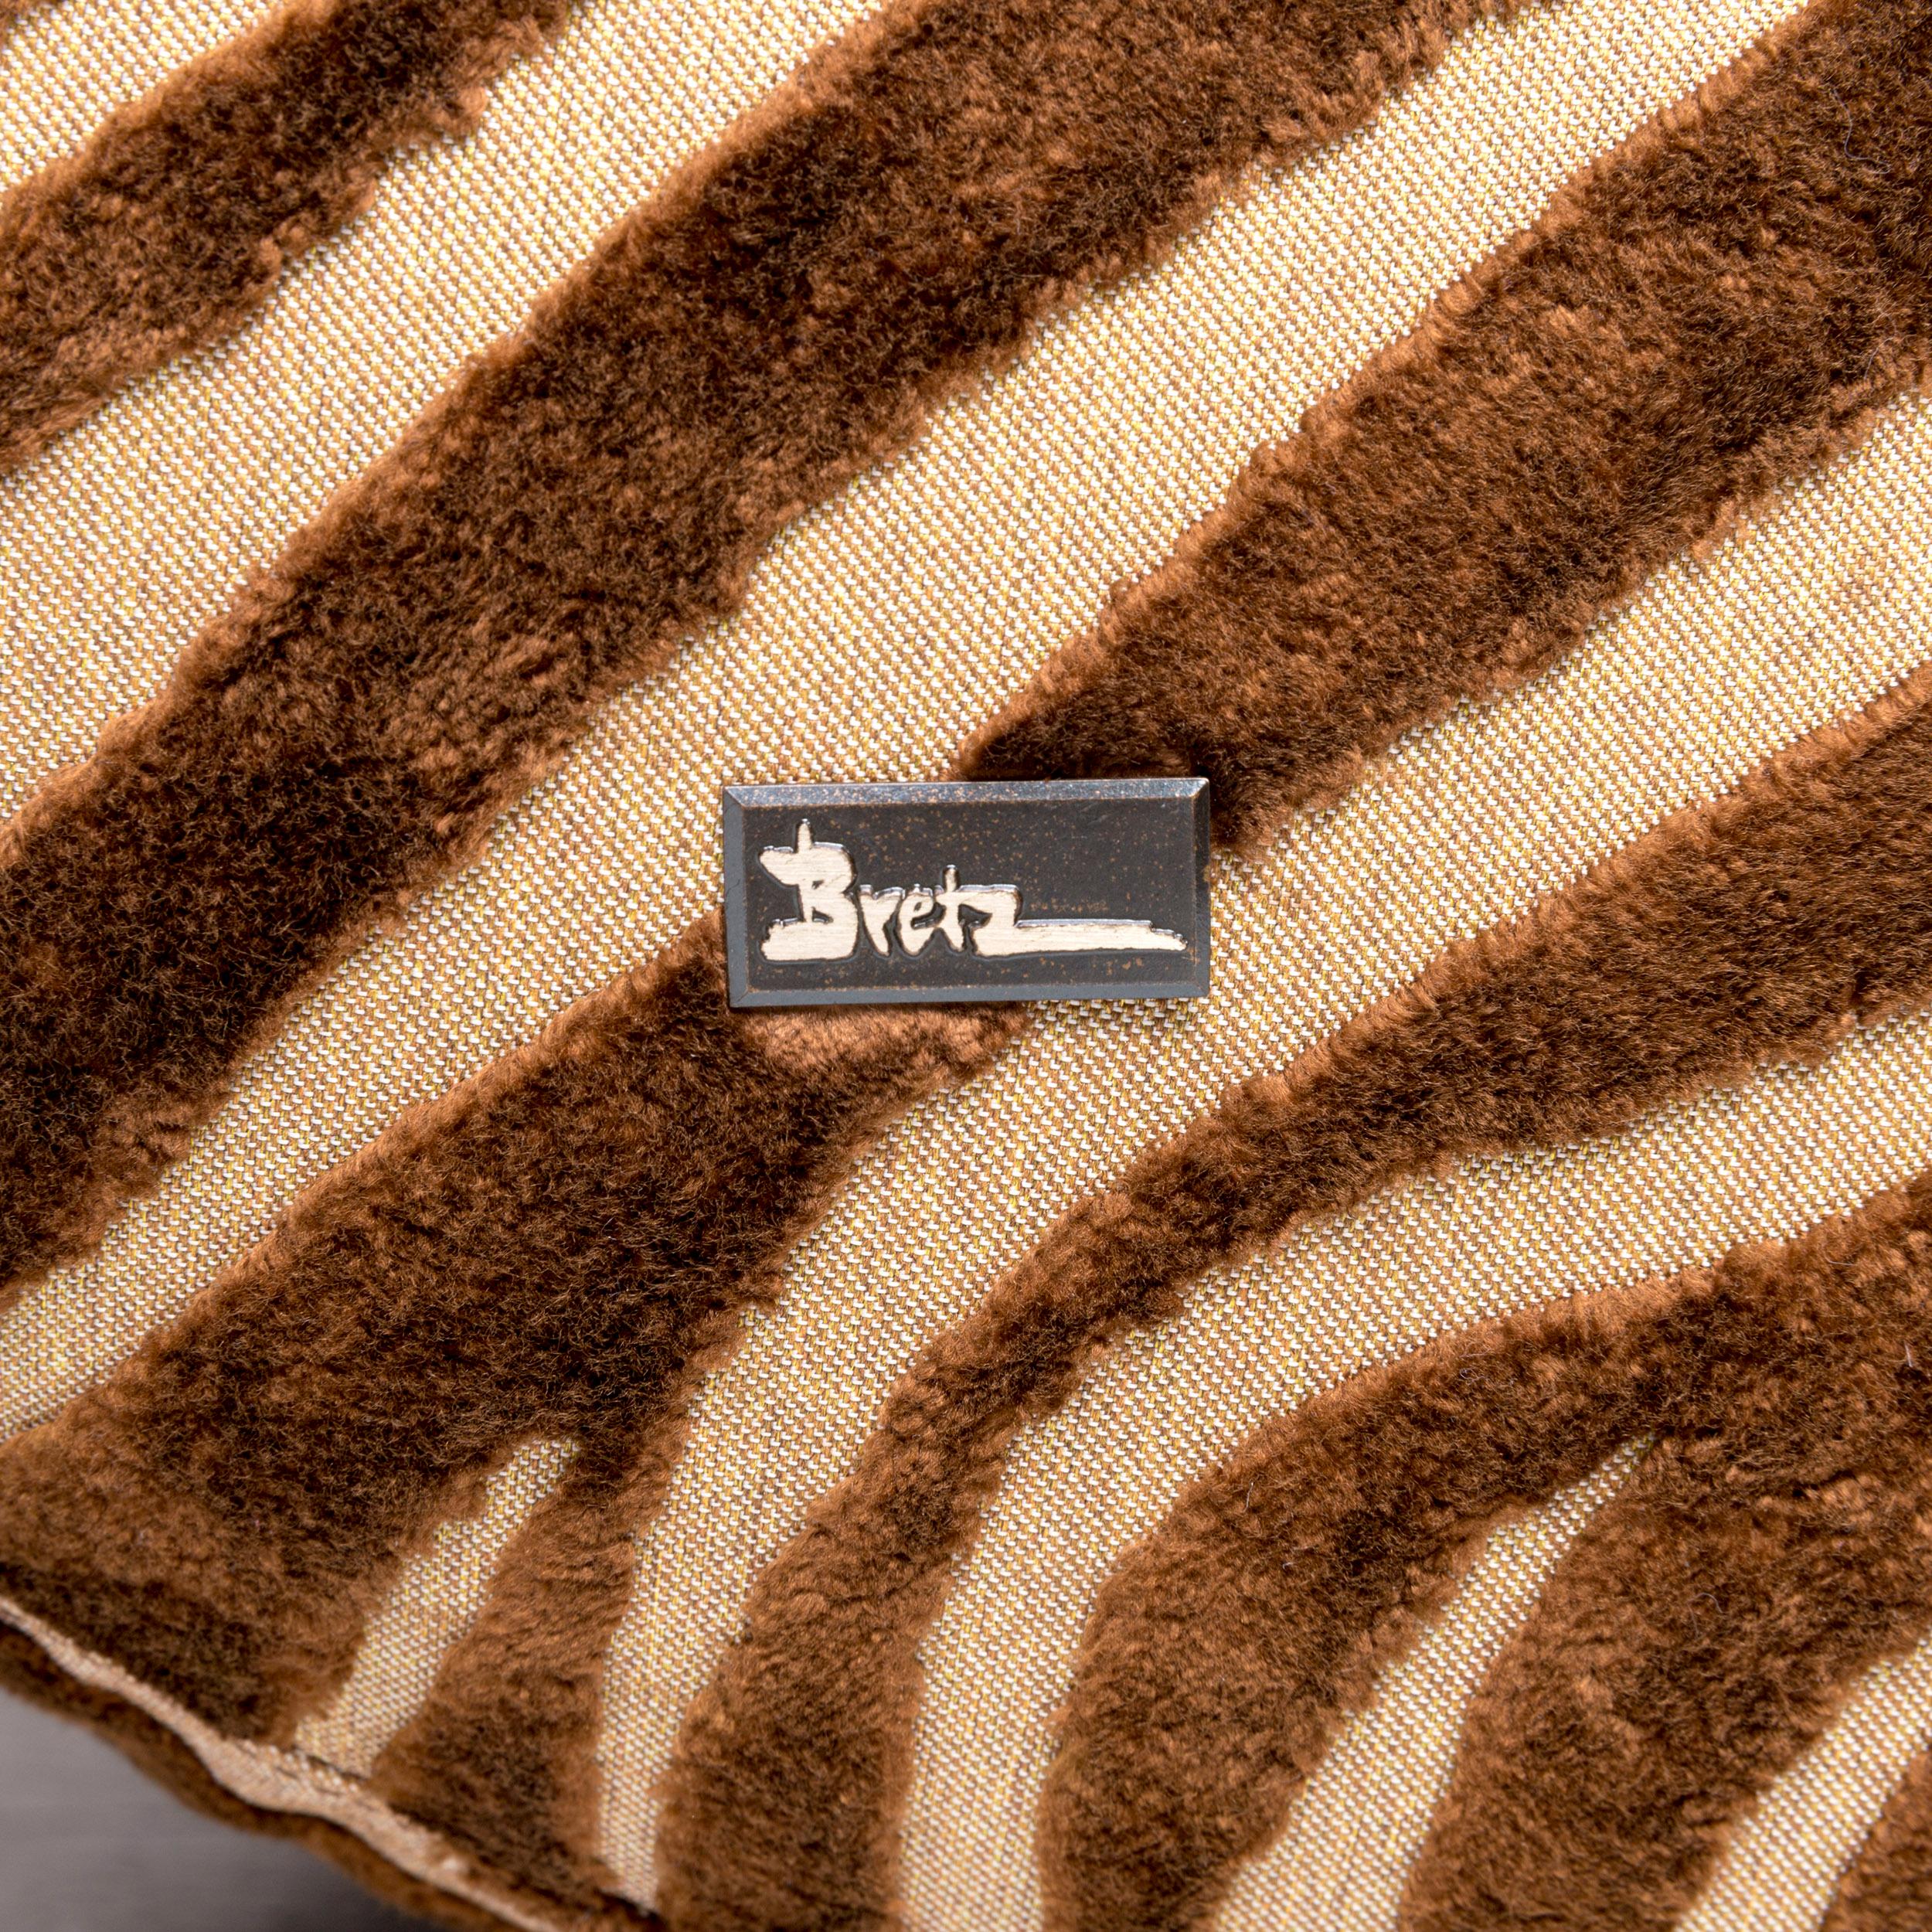 Bretz Mumba Fabric Sofa Brown Three-Seat Patterned Animal Print In Good Condition For Sale In Cologne, DE